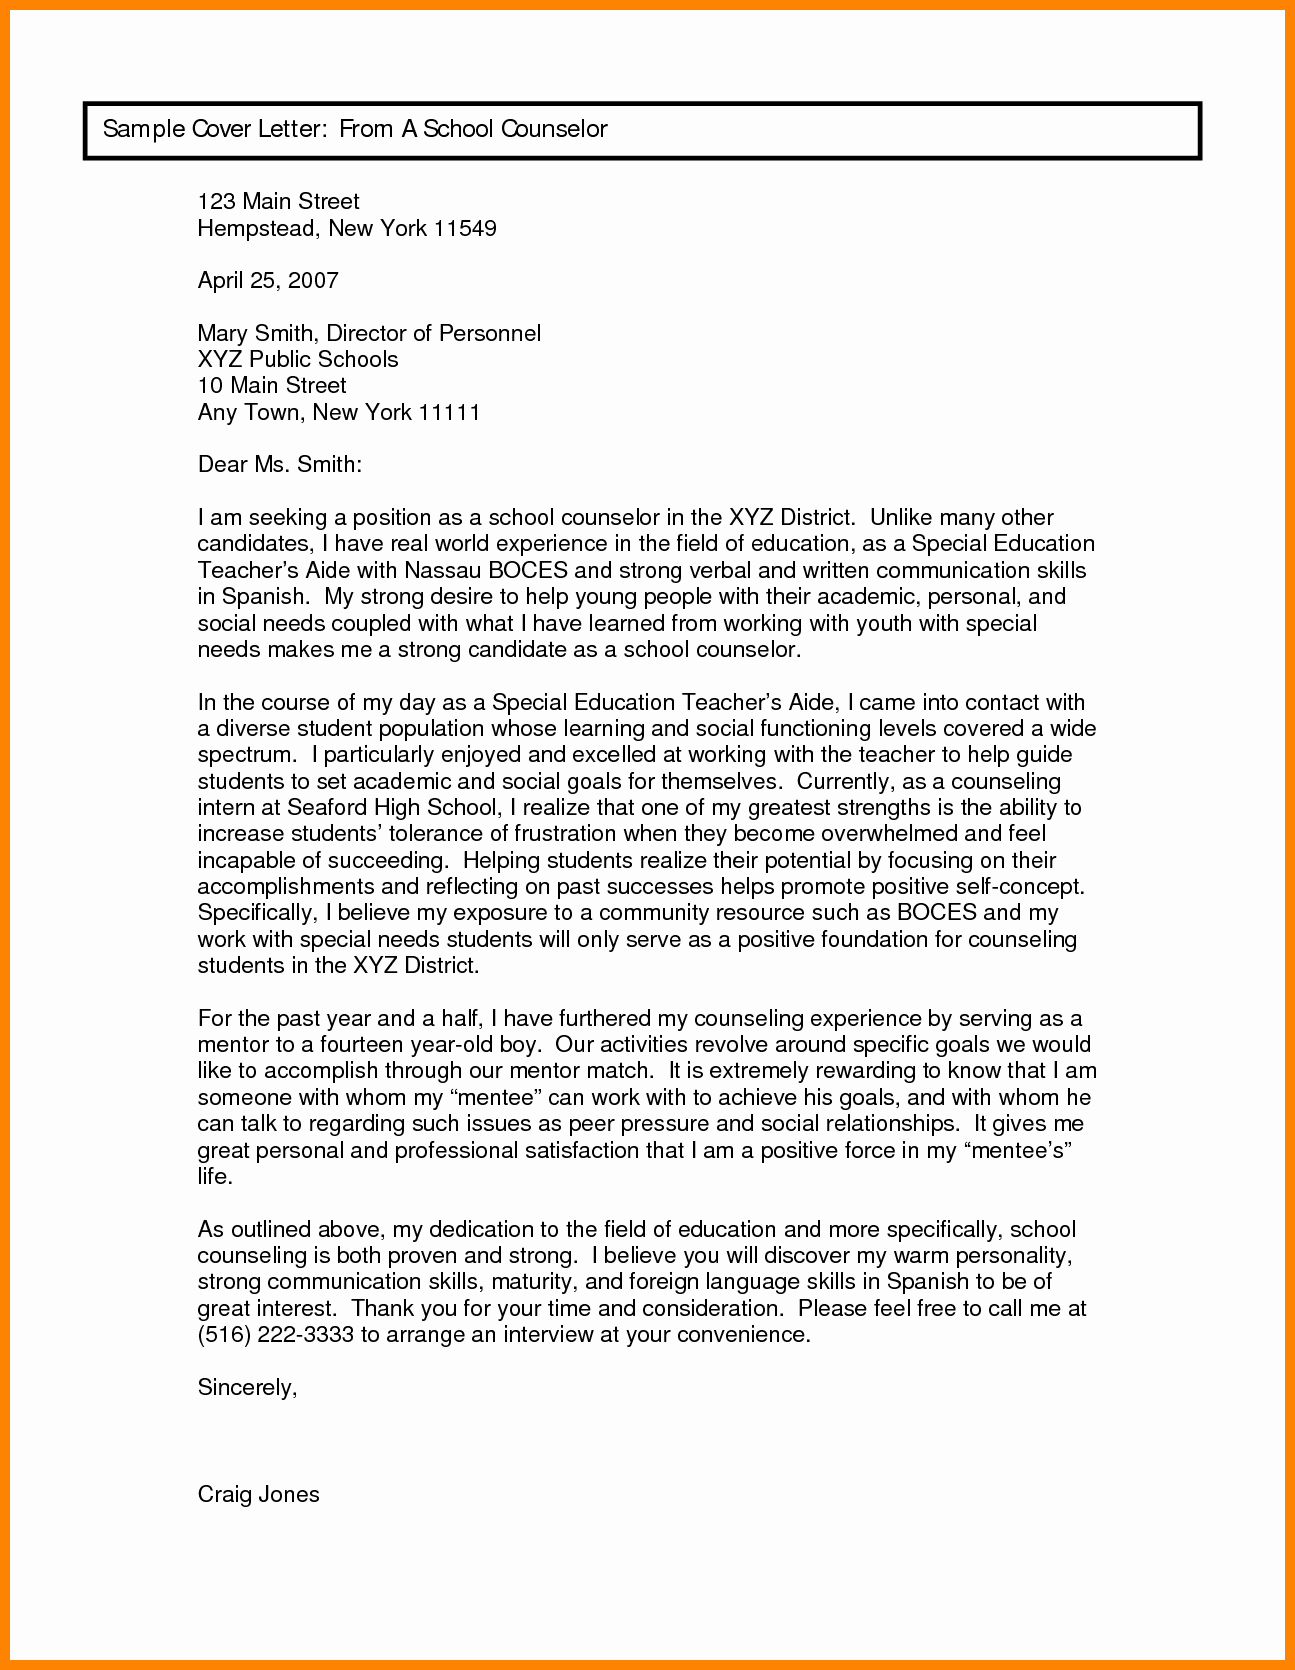 Counselor Letter Of Recommendation Beautiful 6 Letter Of Re Mendation for Counselor Position